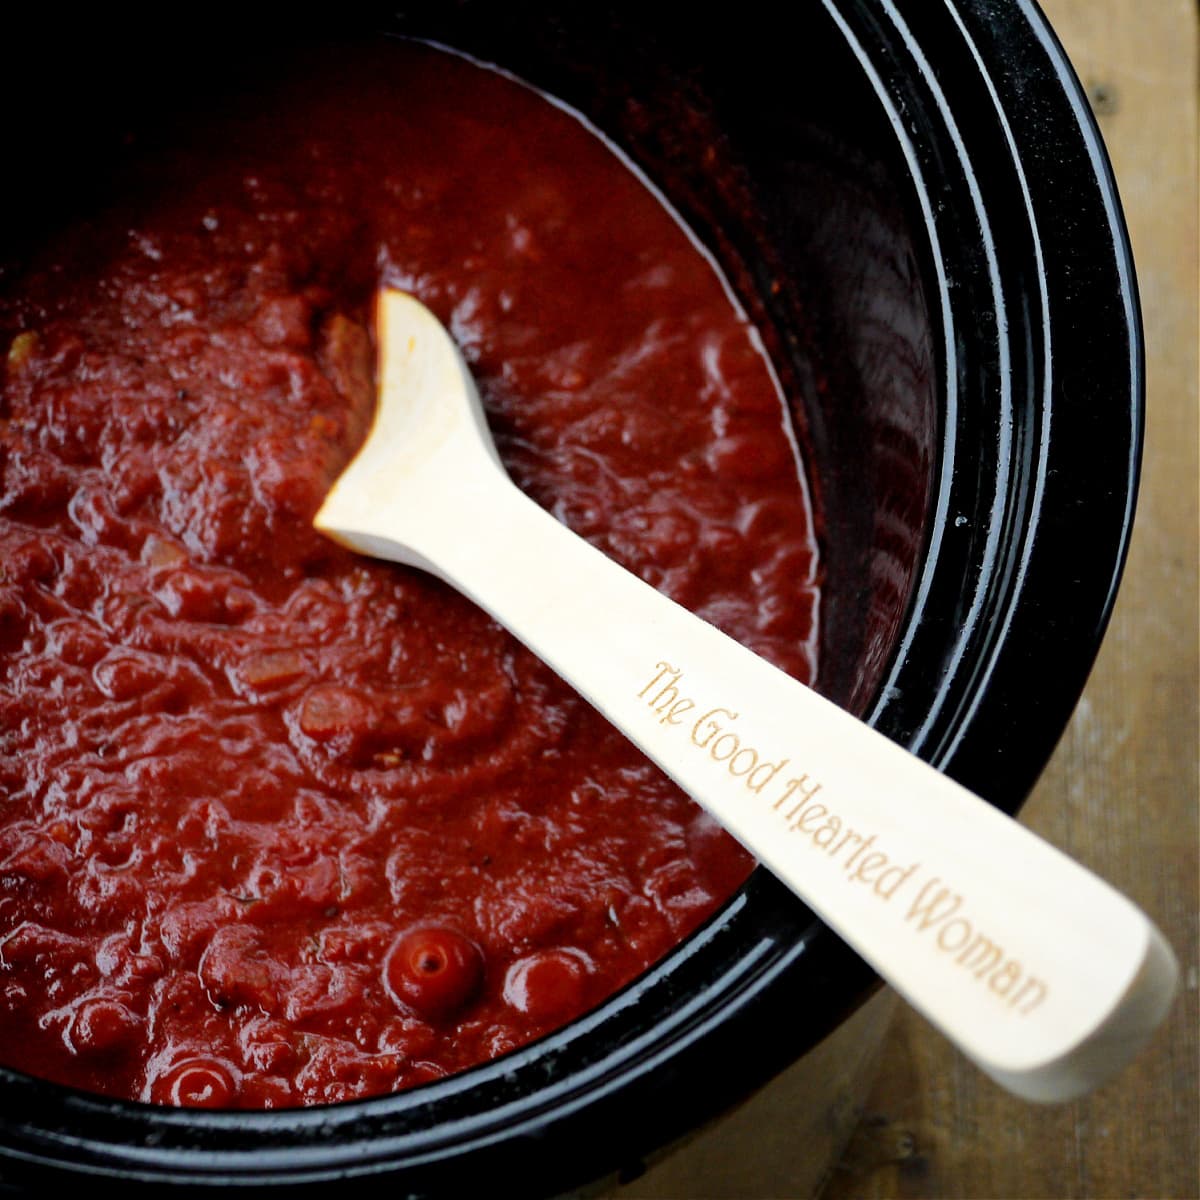 Slow cooker with dark, rich-looking red sauce in it. Wooden spoon angled into cooker. 